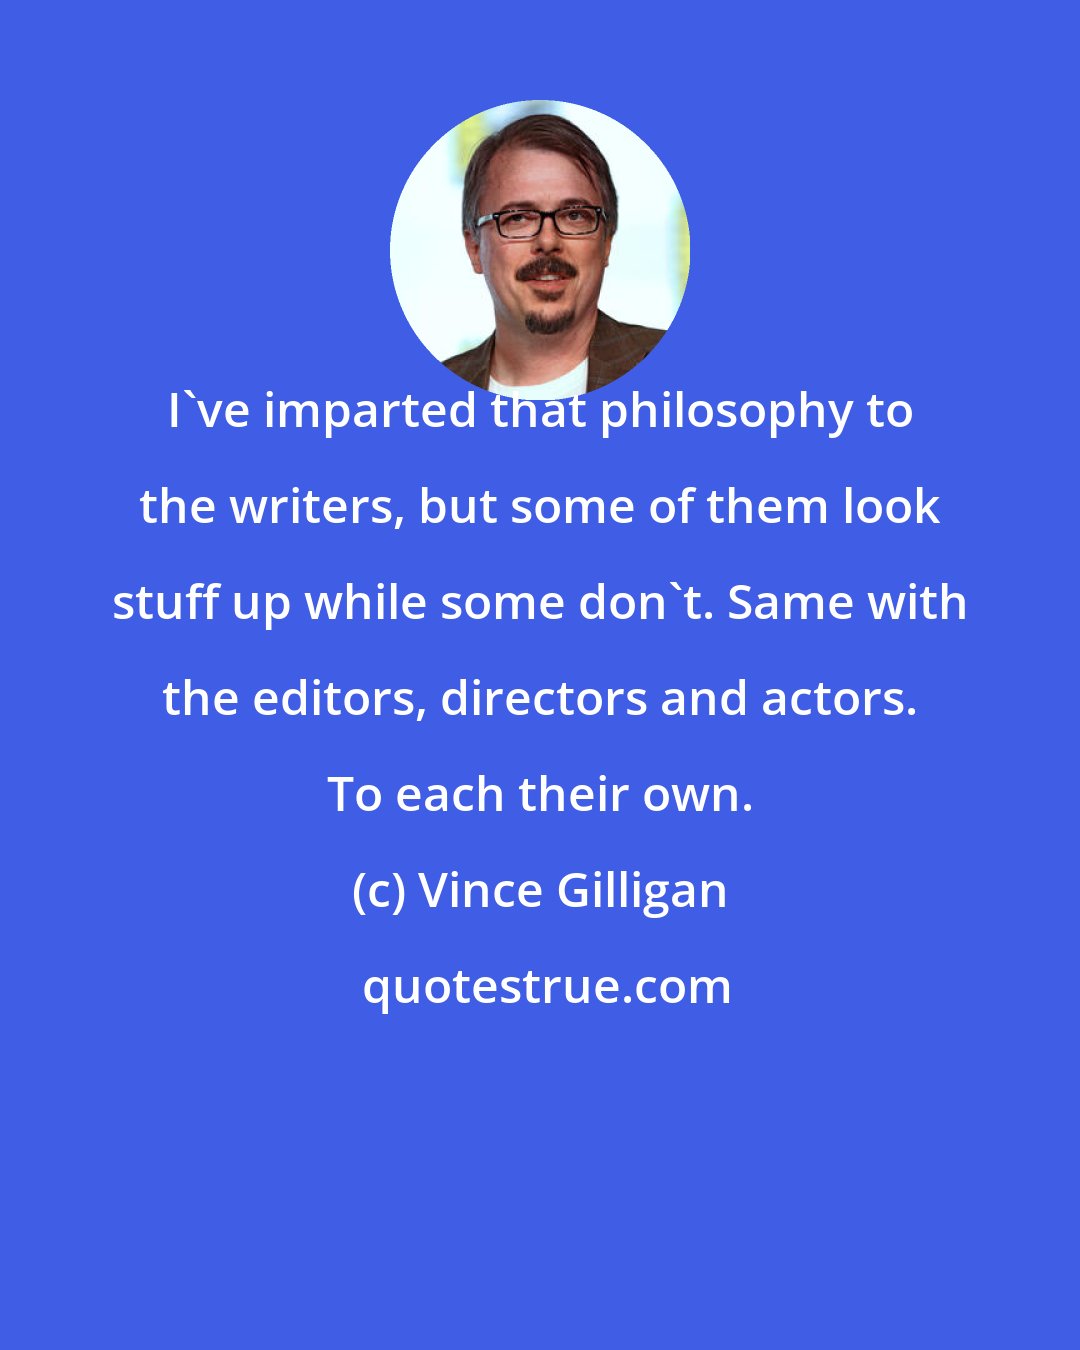 Vince Gilligan: I've imparted that philosophy to the writers, but some of them look stuff up while some don't. Same with the editors, directors and actors. To each their own.